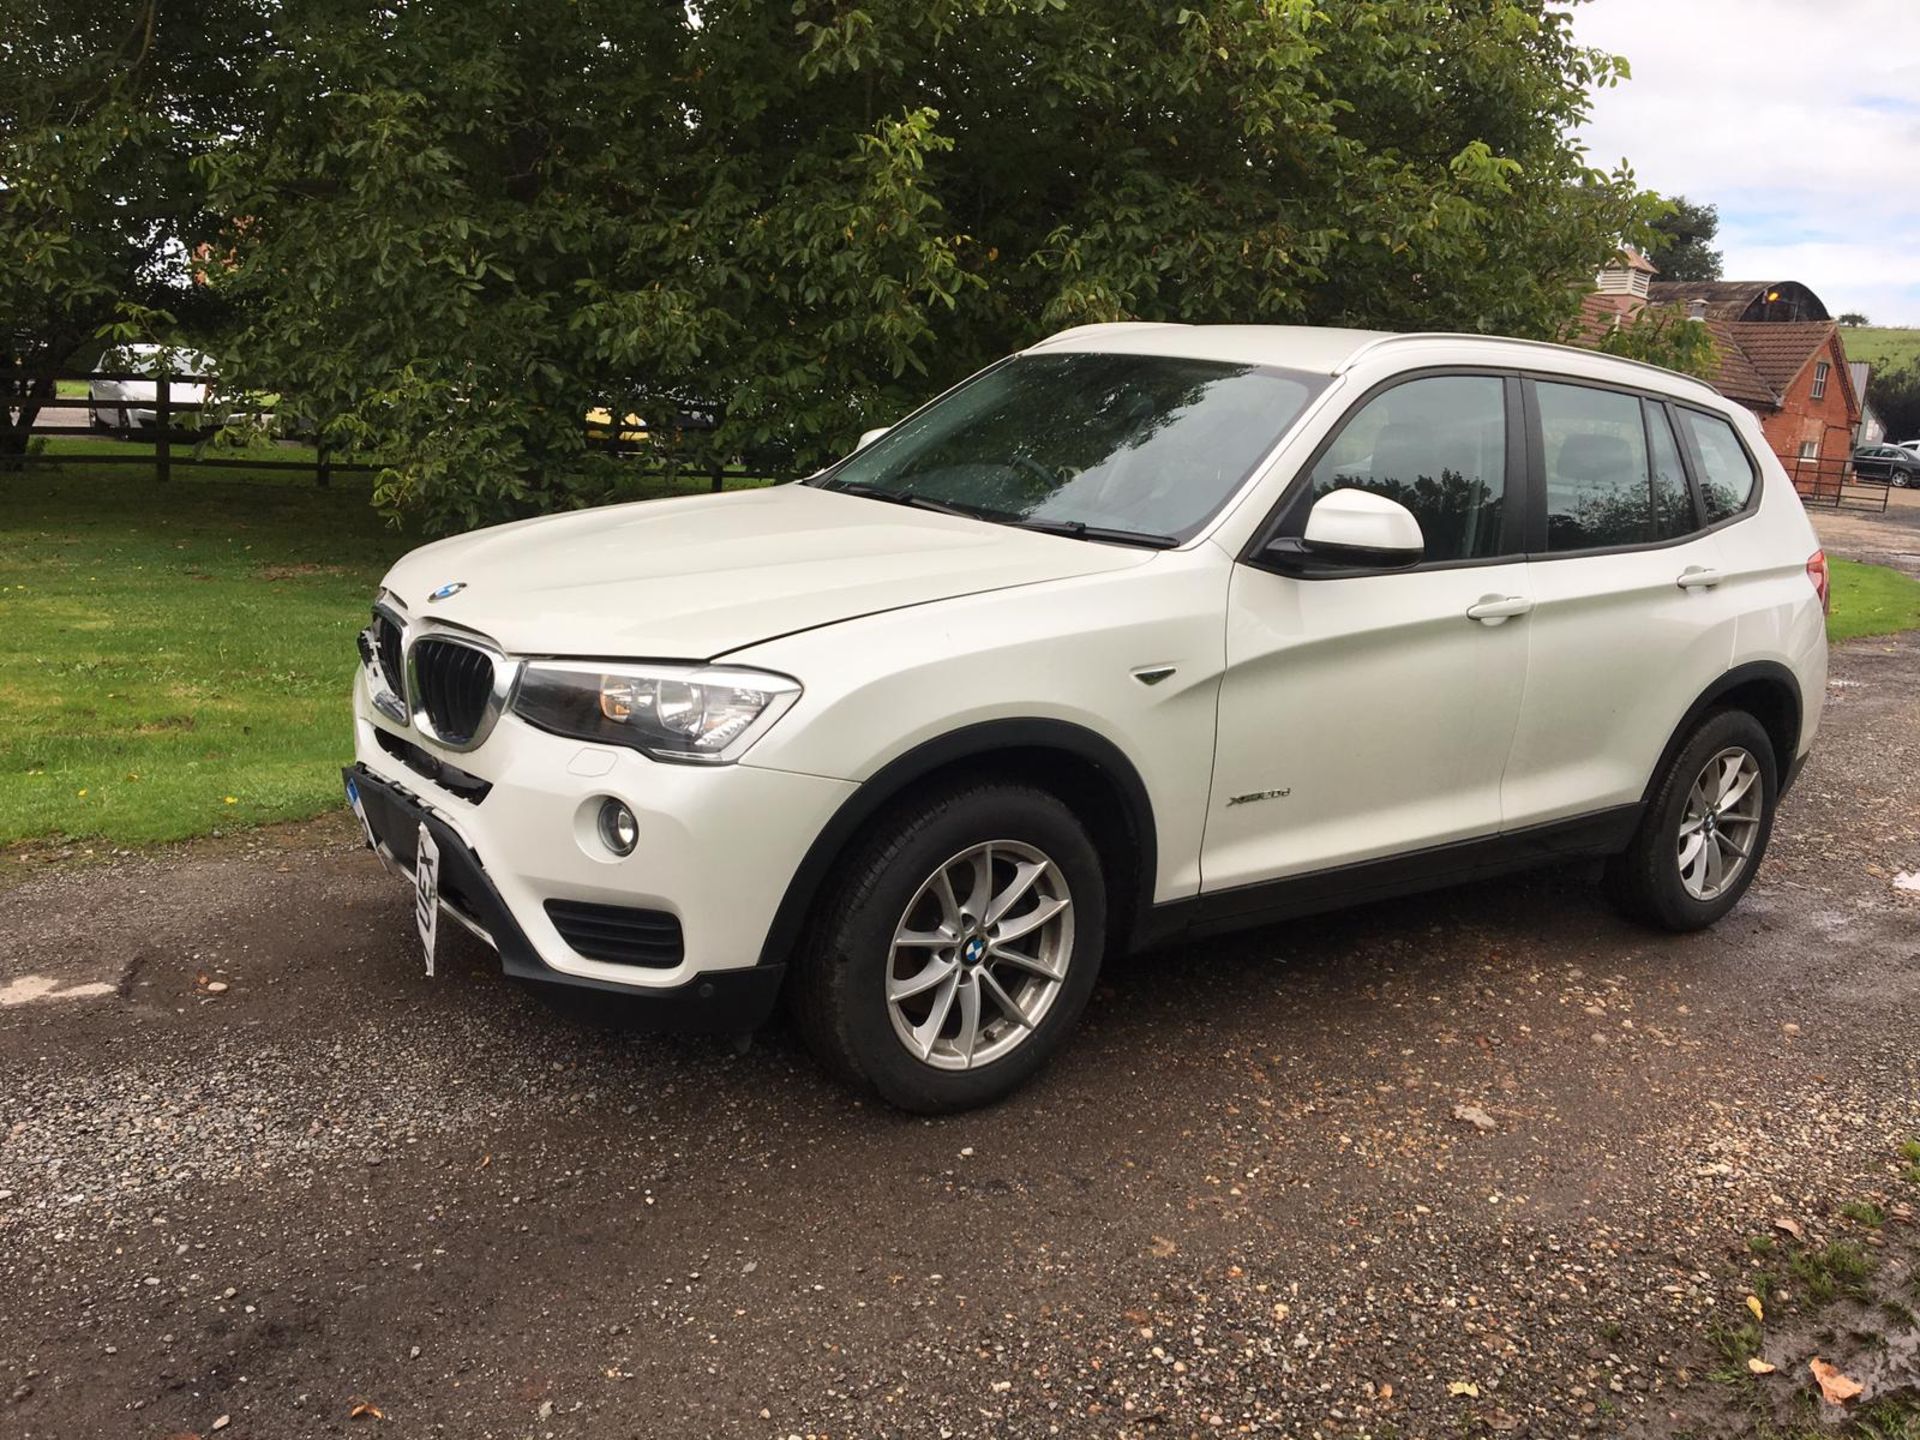 2017/17 REG BMW X3 XDRIVE 20D SE AUTO 2.0 DIESEL WHITE ESTATE, SHOWING 0 FORMER KEEPERS *NO VAT* - Image 3 of 15